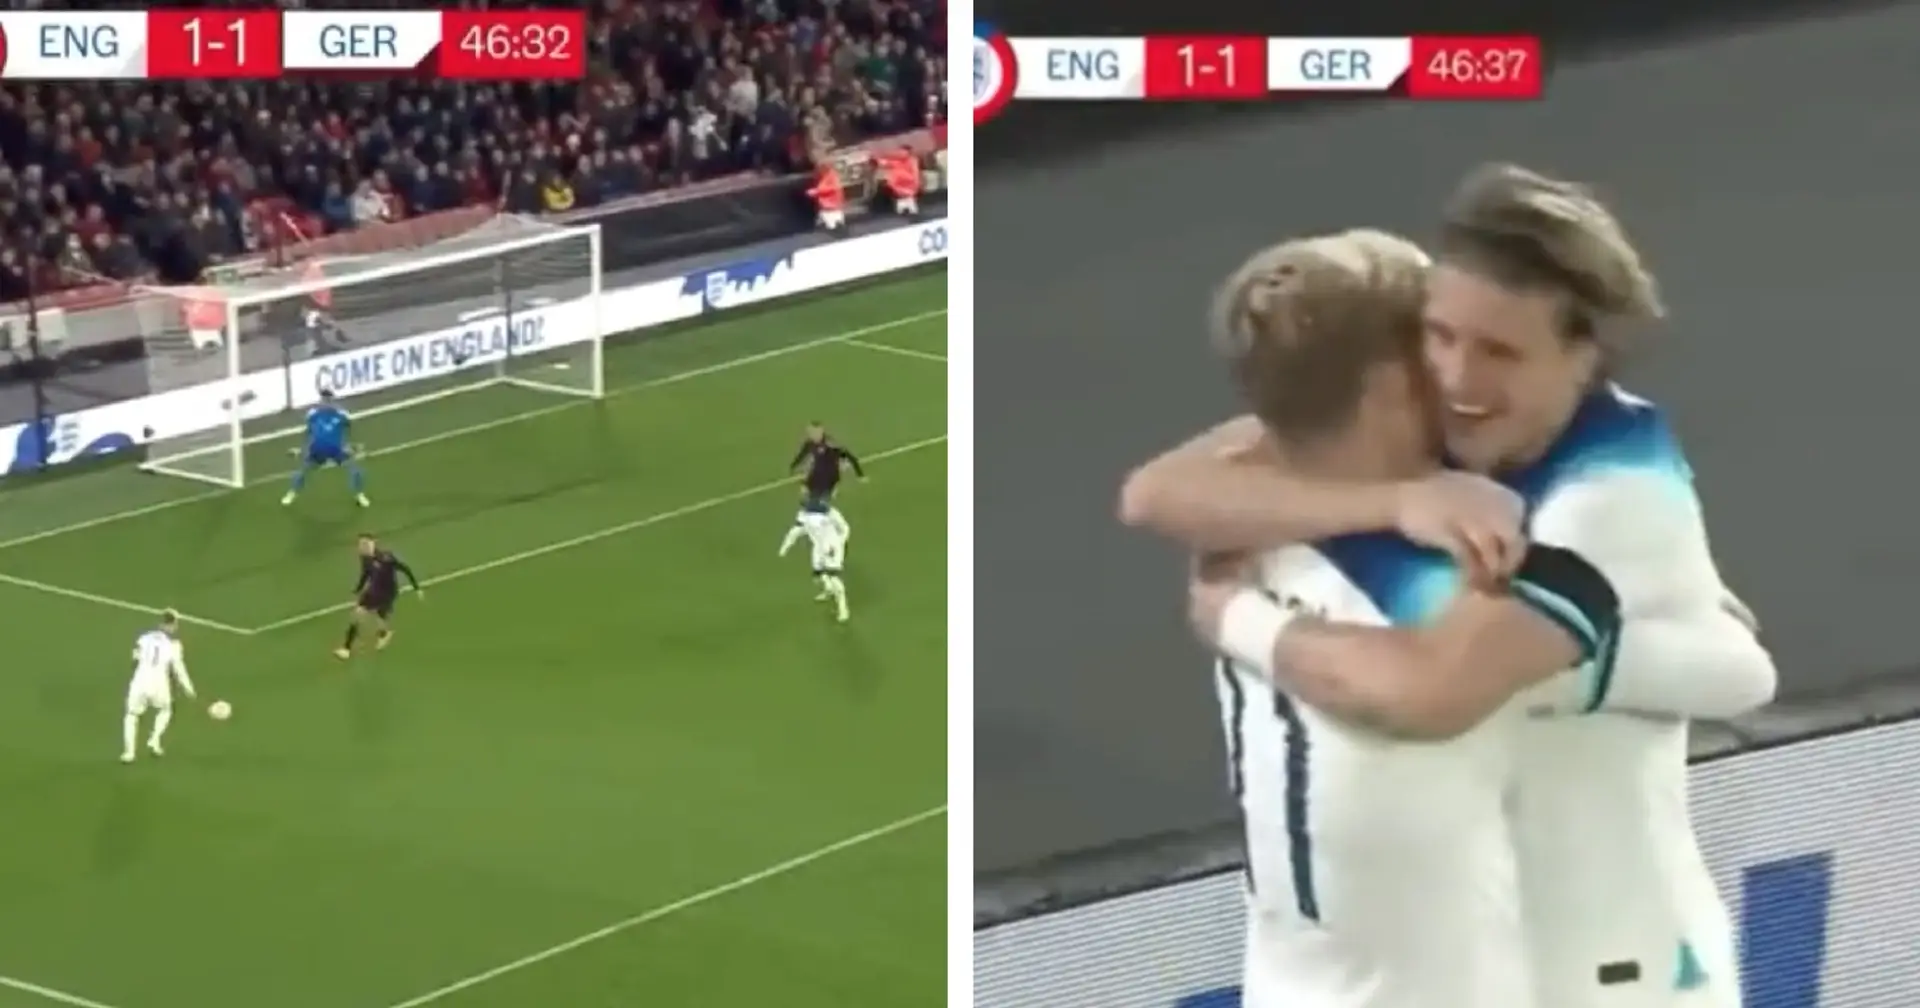 Conor Gallagher scores for England U21s vs Germany – Chelsea target Gordon assists